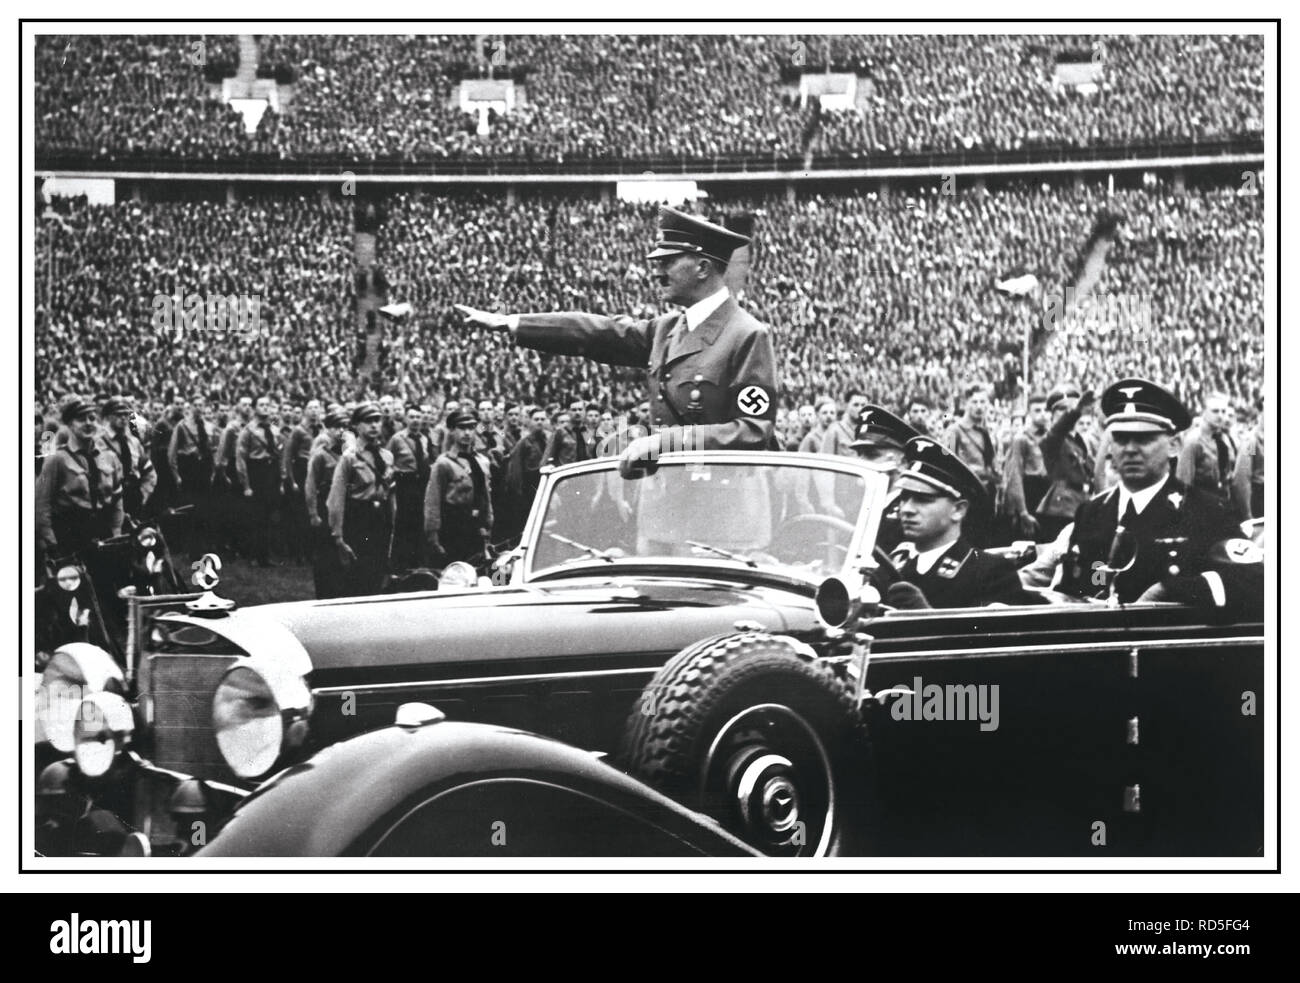 Adolf Hitler in uniform wearing swastika armband gives Heil Hitler salute to the military and crowds at a huge Nazi rally in 1938 Germany. Hitler salutes attendees at a Reichsparteitag (Reich Party Day) in Nuremberg, Germany. A uniformed Martin Bormann also in attendance sitting in rear of open top Mercedes Car Stock Photo